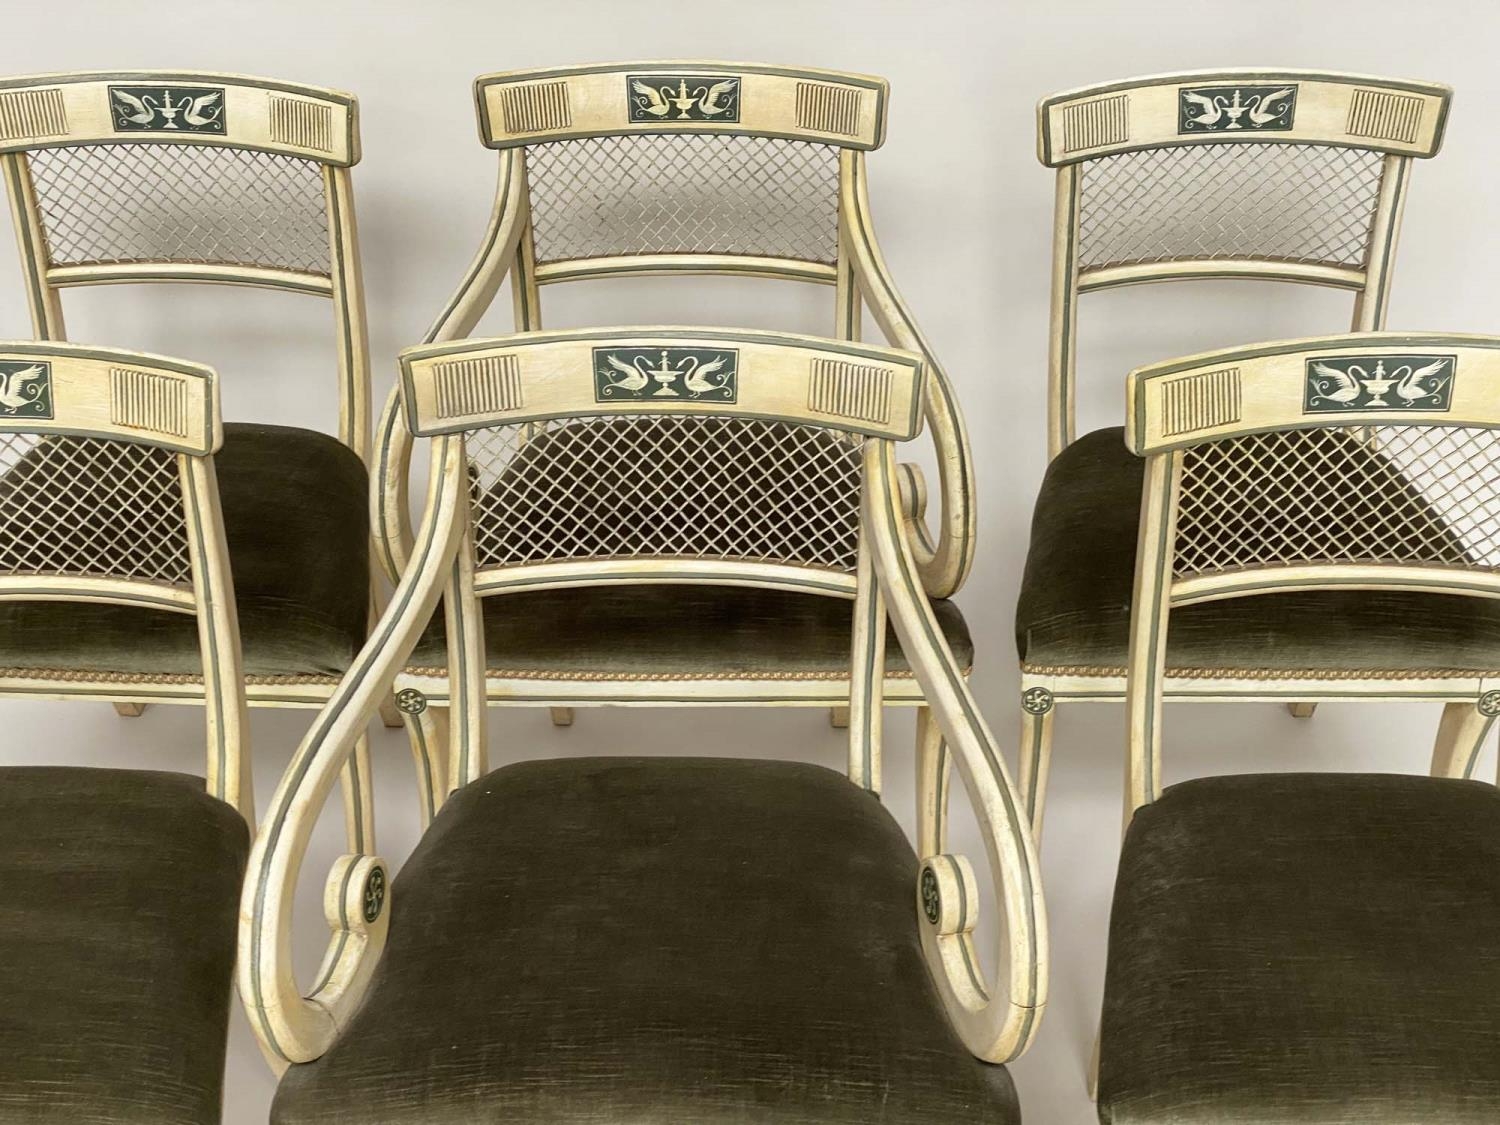 DINING CHAIRS, a set of six, Regency style painted with arch bowed backs and green velvet - Image 7 of 7